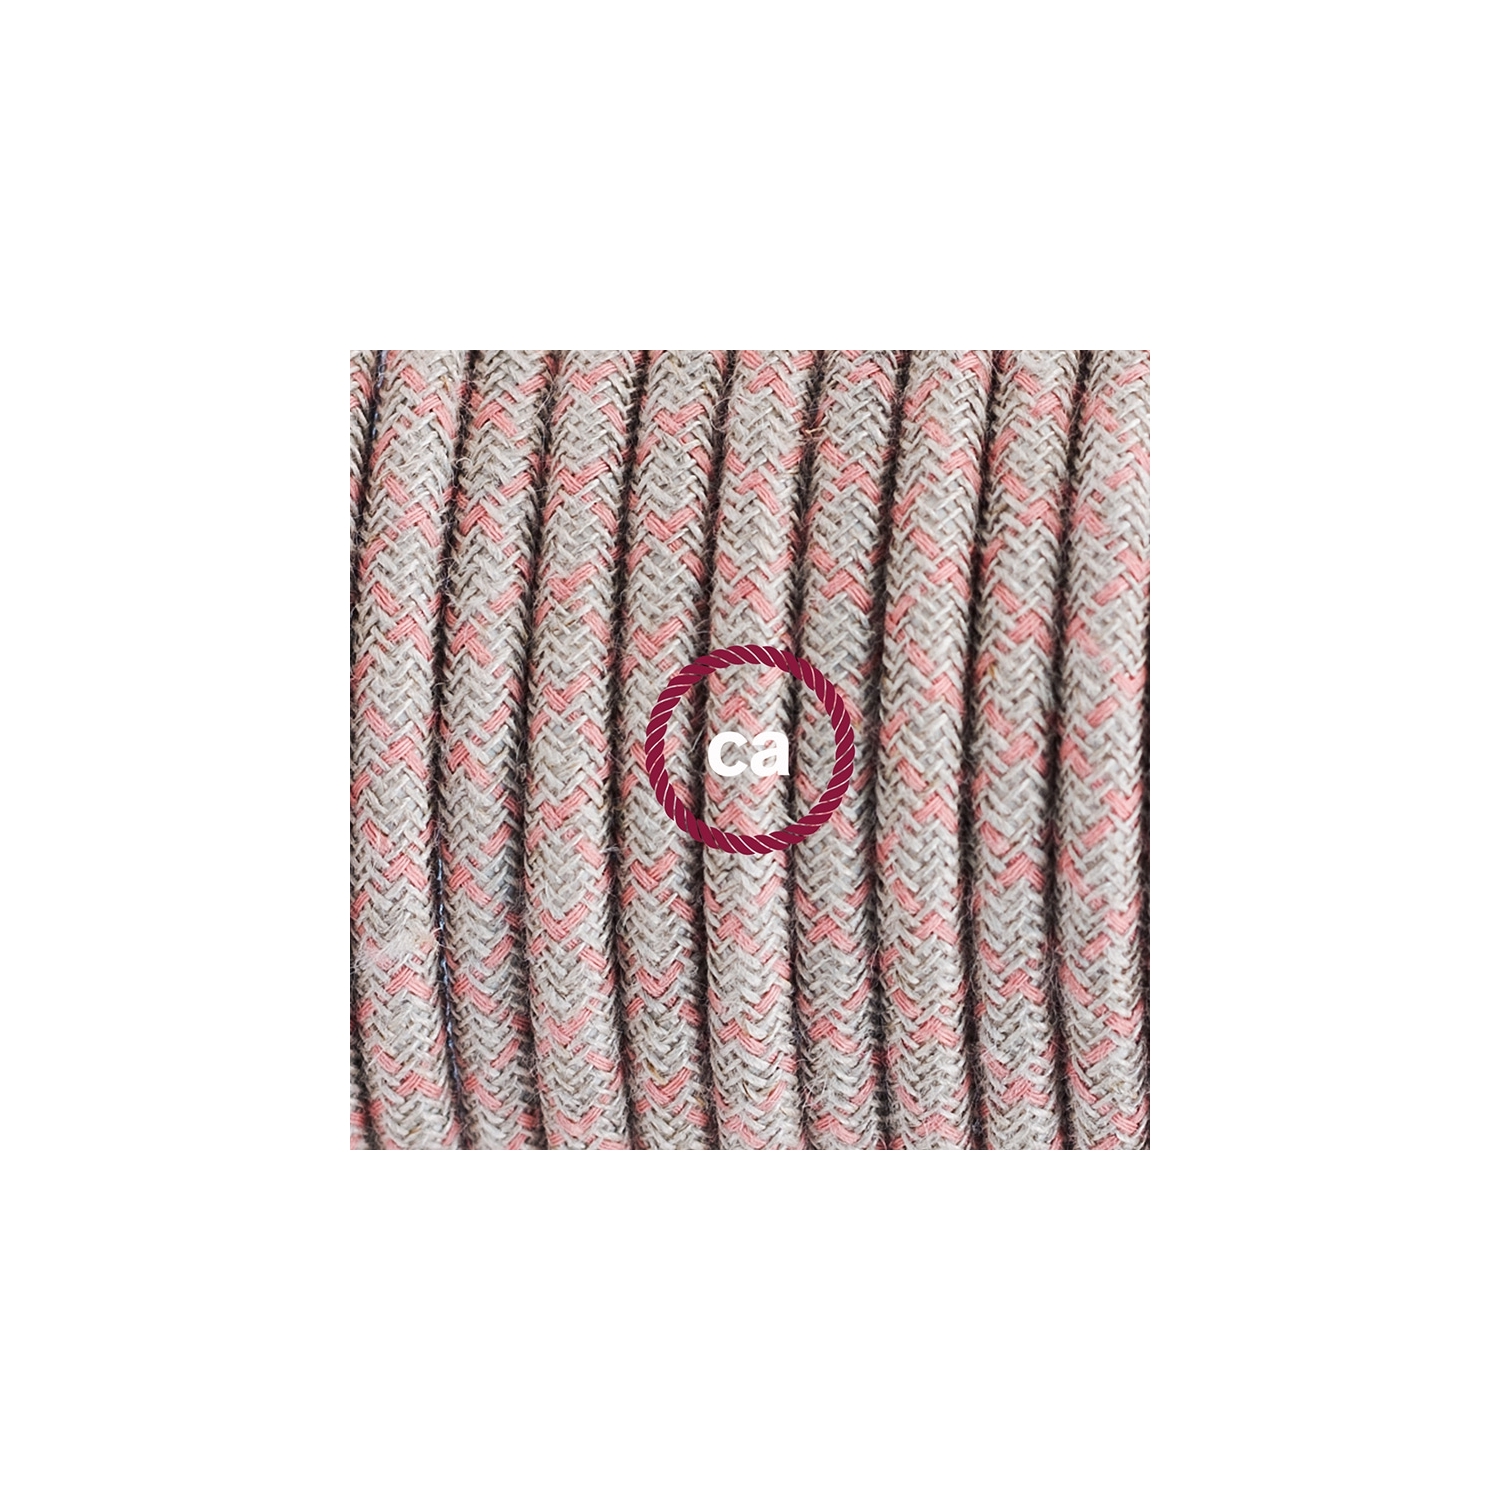 Create your RD61 Lozenge Ancient Pink Snake and bring the light wherever you want.